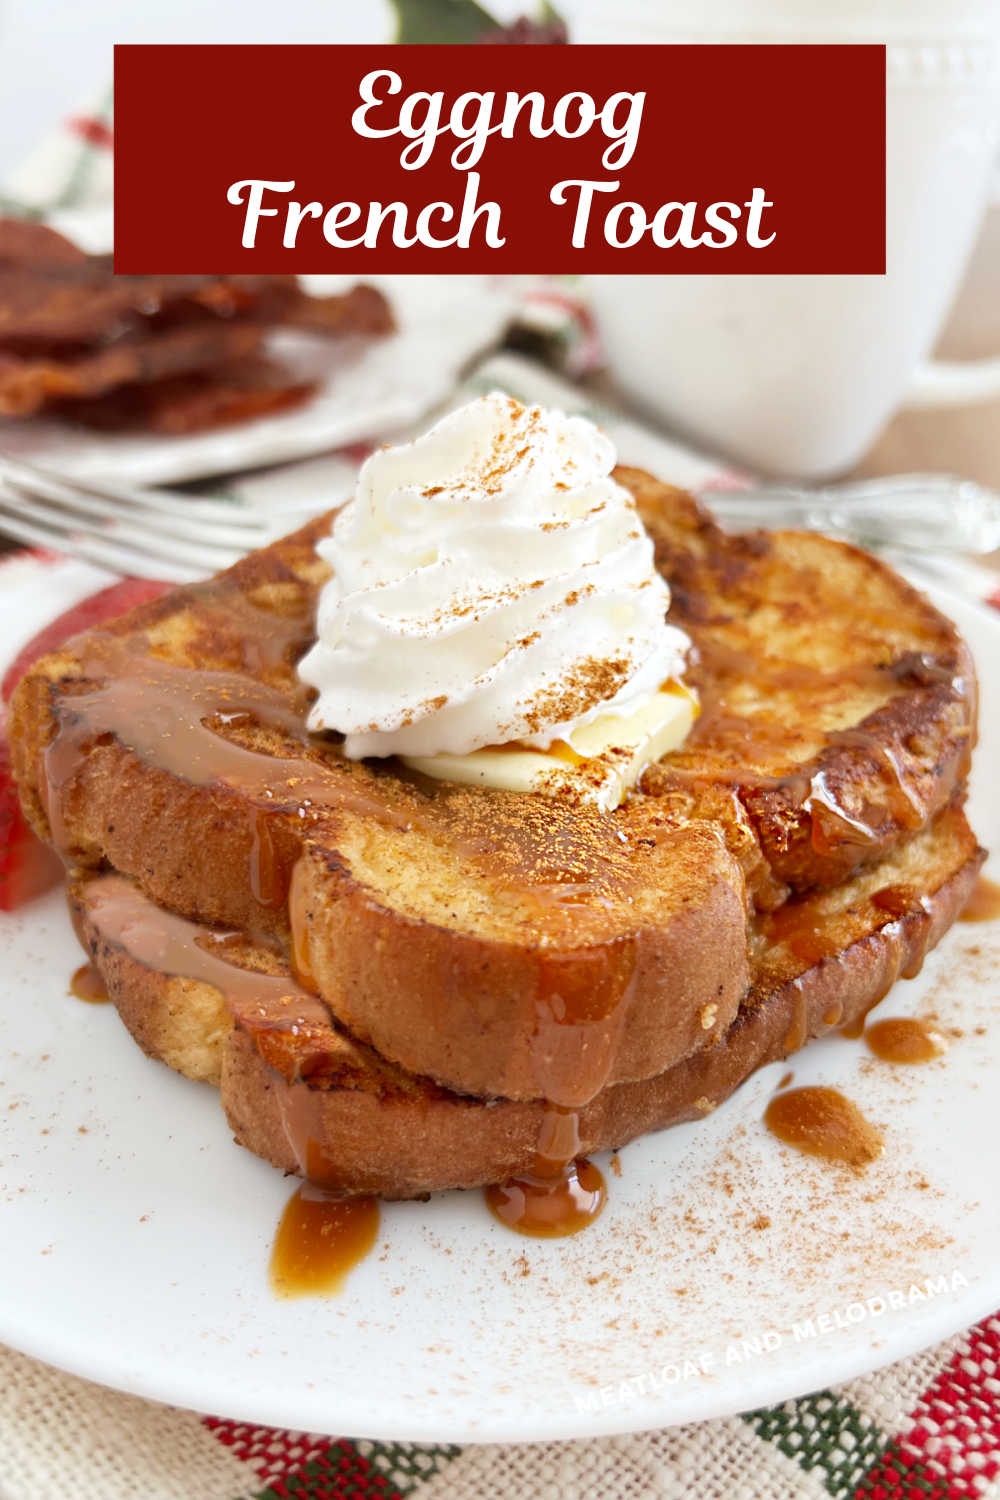 Eggnog French Toast is made with thick slices of bread dipped in an eggnog mixture and cooked until golden brown and delicious. Perfect for Christmas breakfast, brunch or special occasions during the holiday season! via @meamel